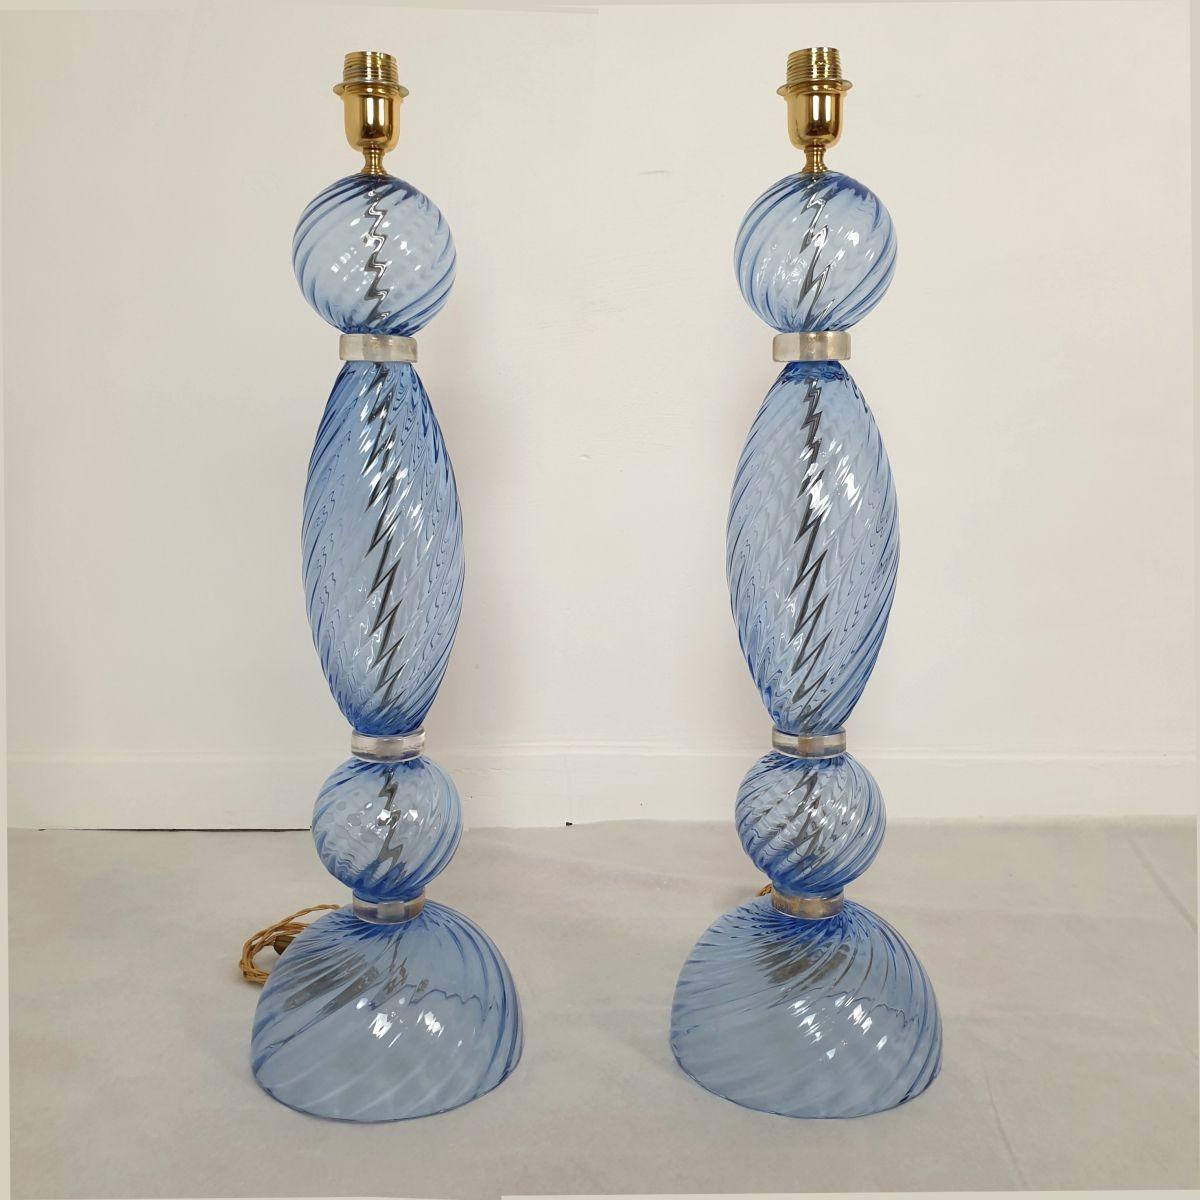 Pair of Blue Murano glass Mid-Century Modern lamps, Seguso style Italy 1980s.
The neoclassical large table lamps are made of a light blue color Murano glass with clear-gold accents and brass mounts.
The lamps have one light each and have been